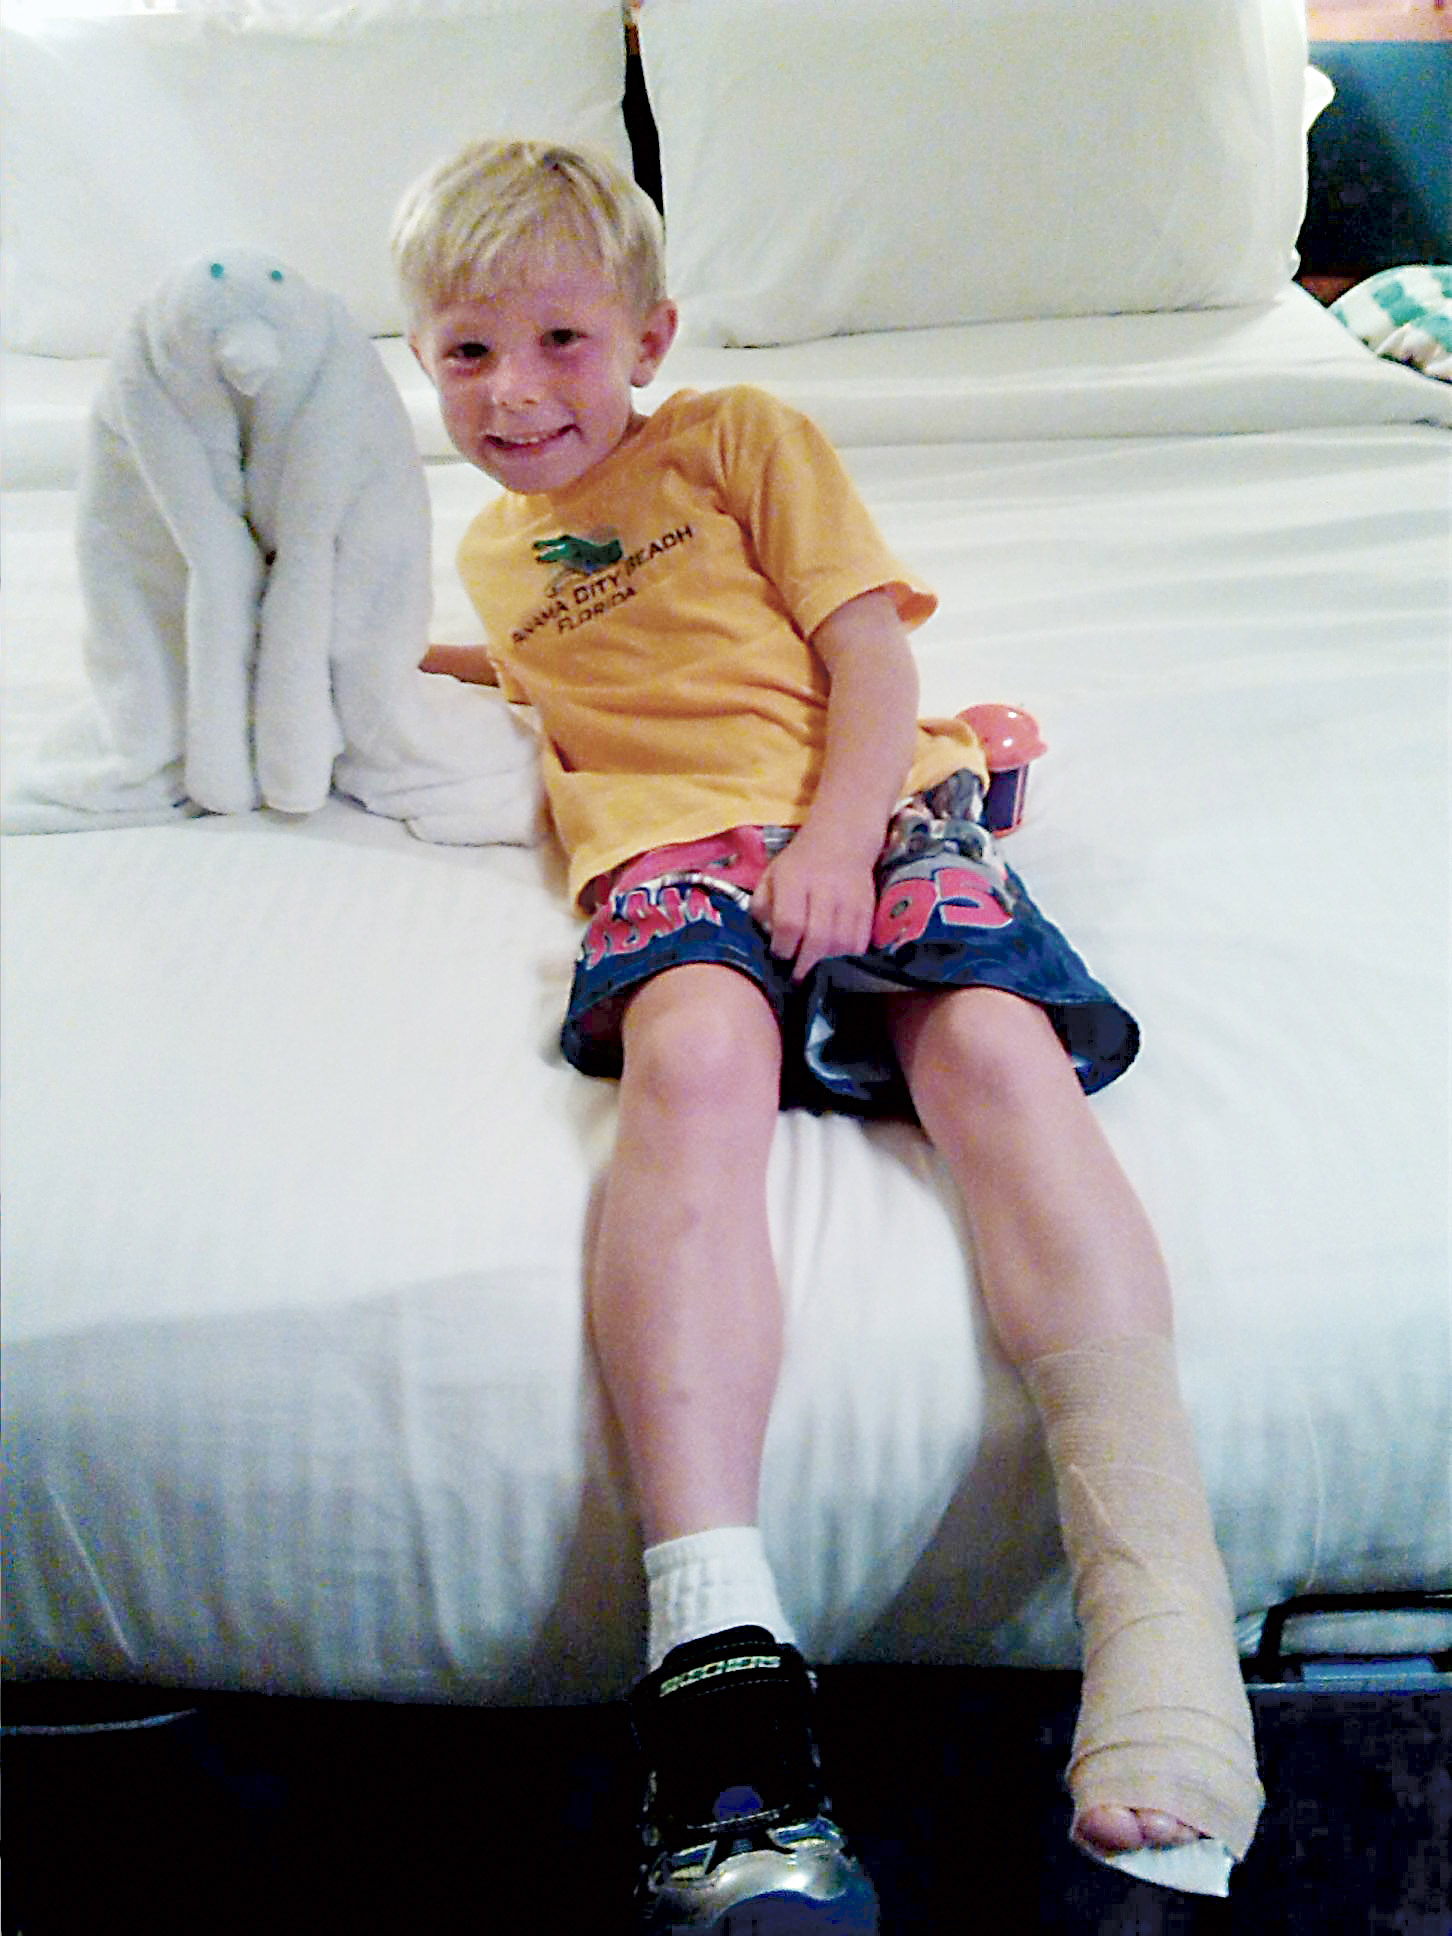 Logan Hamby Foto: Alex City Outlook http://www.alexcityoutlook.com/2013/11/01/6-year-old-survives-shark-attack/